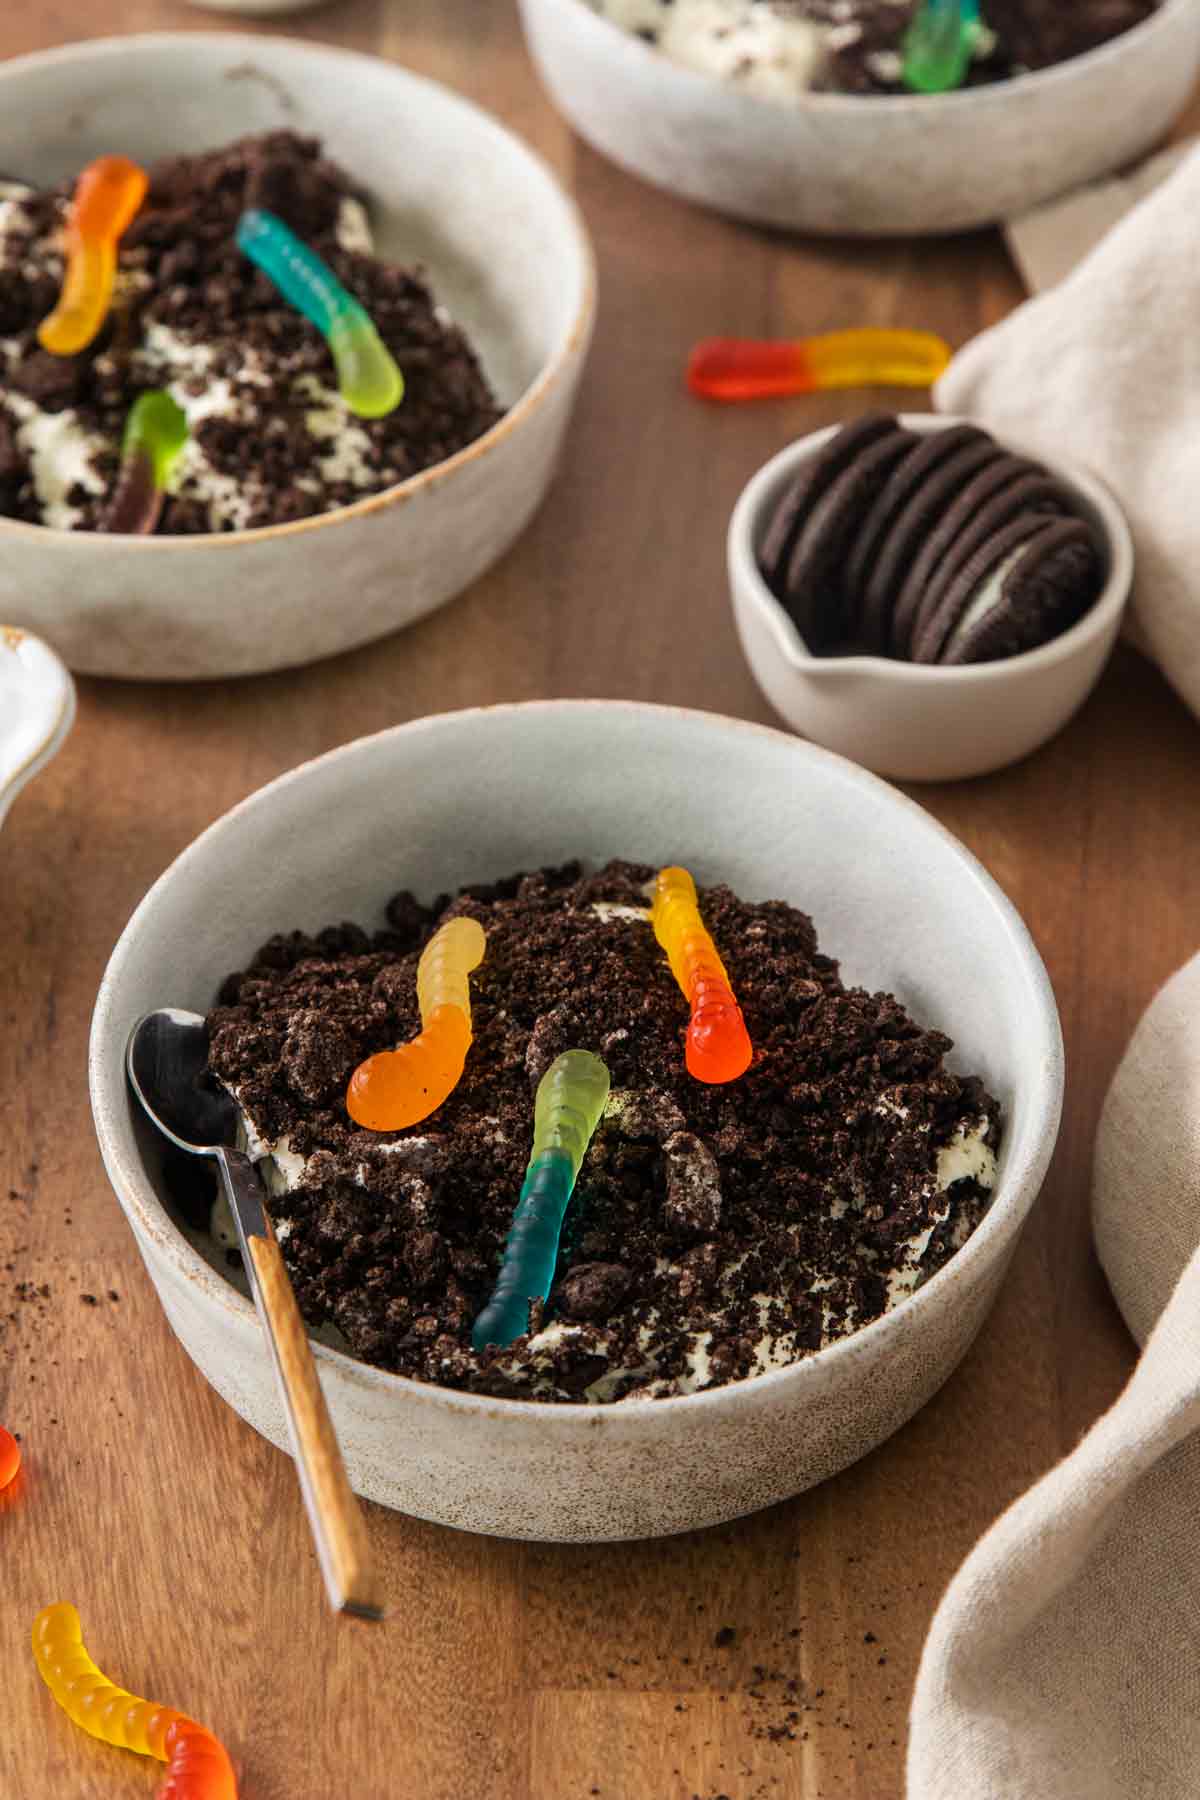 Dirt and Worms Dessert